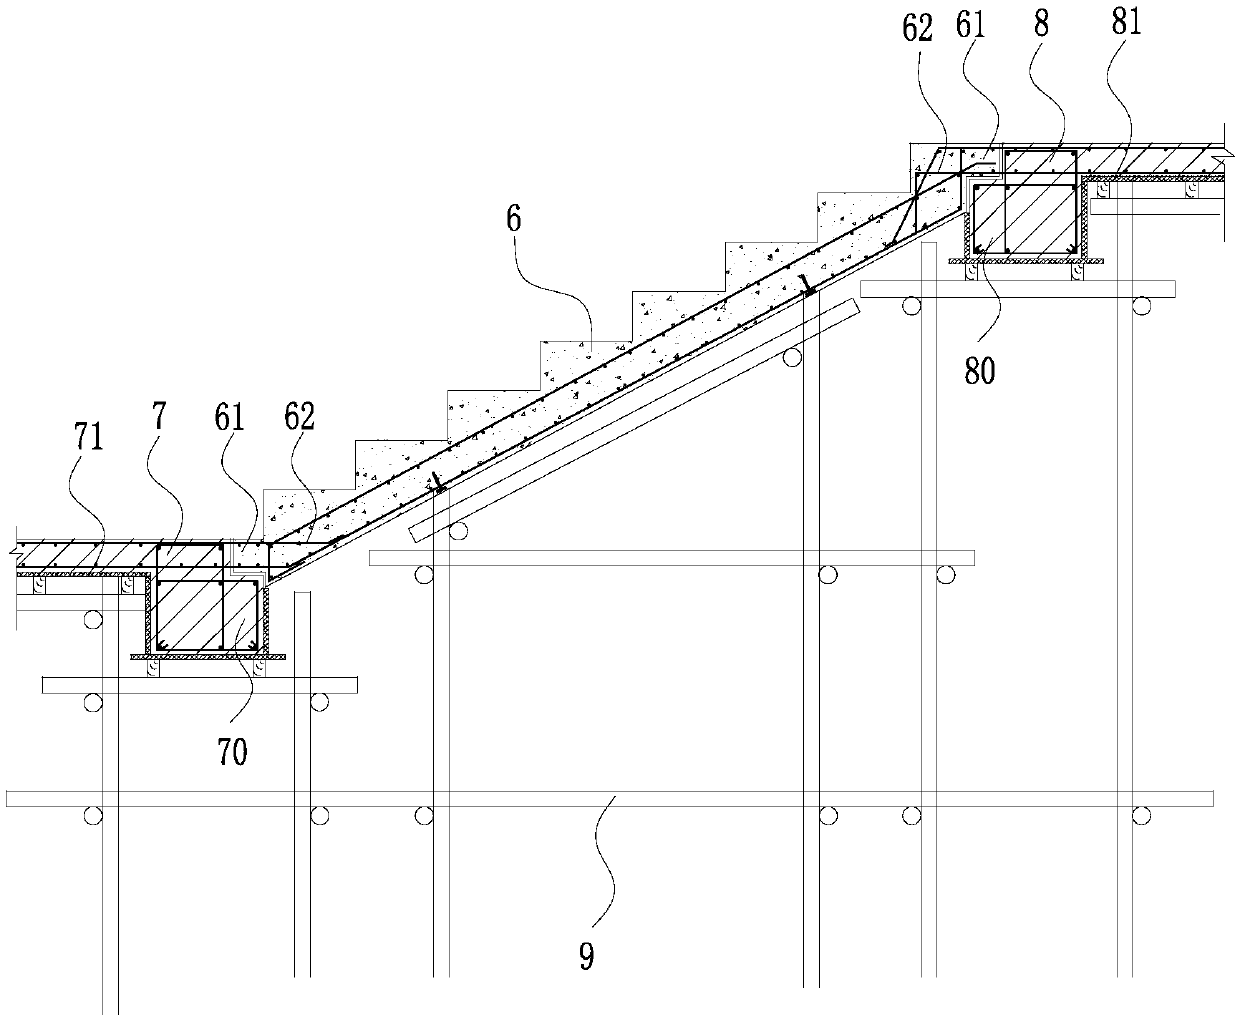 Construction method of prefabricated part and cast-in-place column assembly integral concrete frame structure